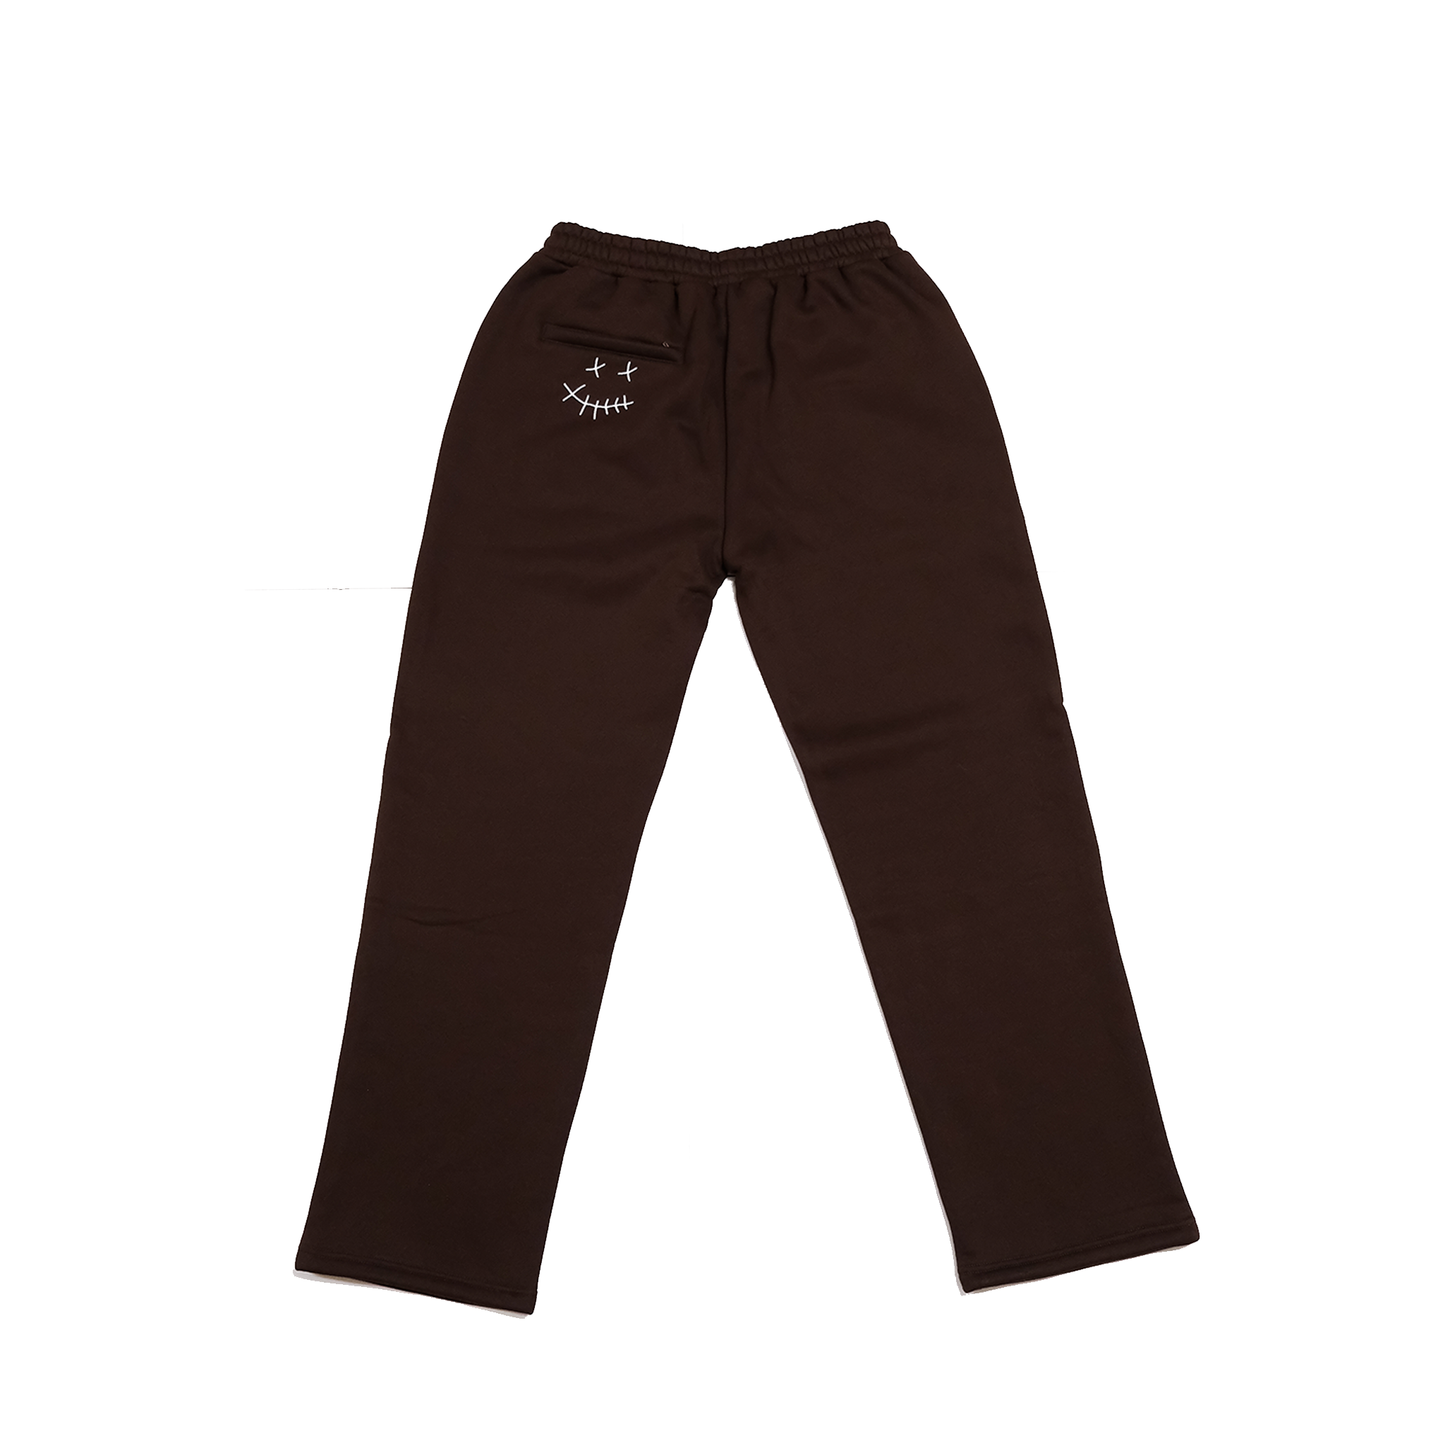 * SALE* 'THE DAILY' COFFEE SWEATPANTS (BROWN)